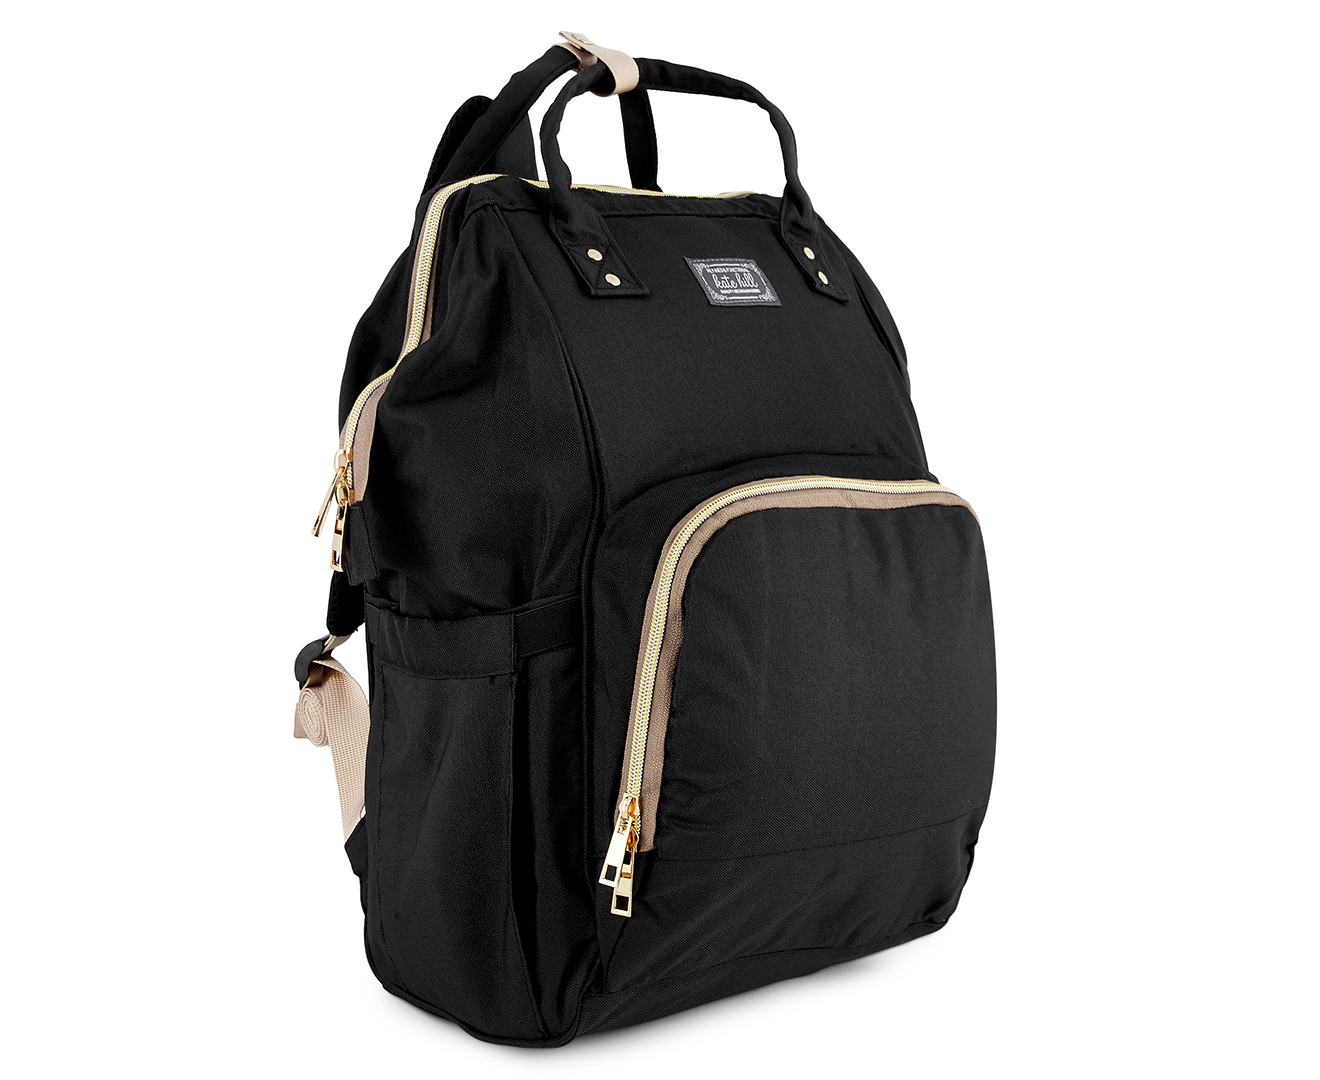 Kate Hill Baby Maternity Nappy Bag Backpack - Black | Catch.com.au